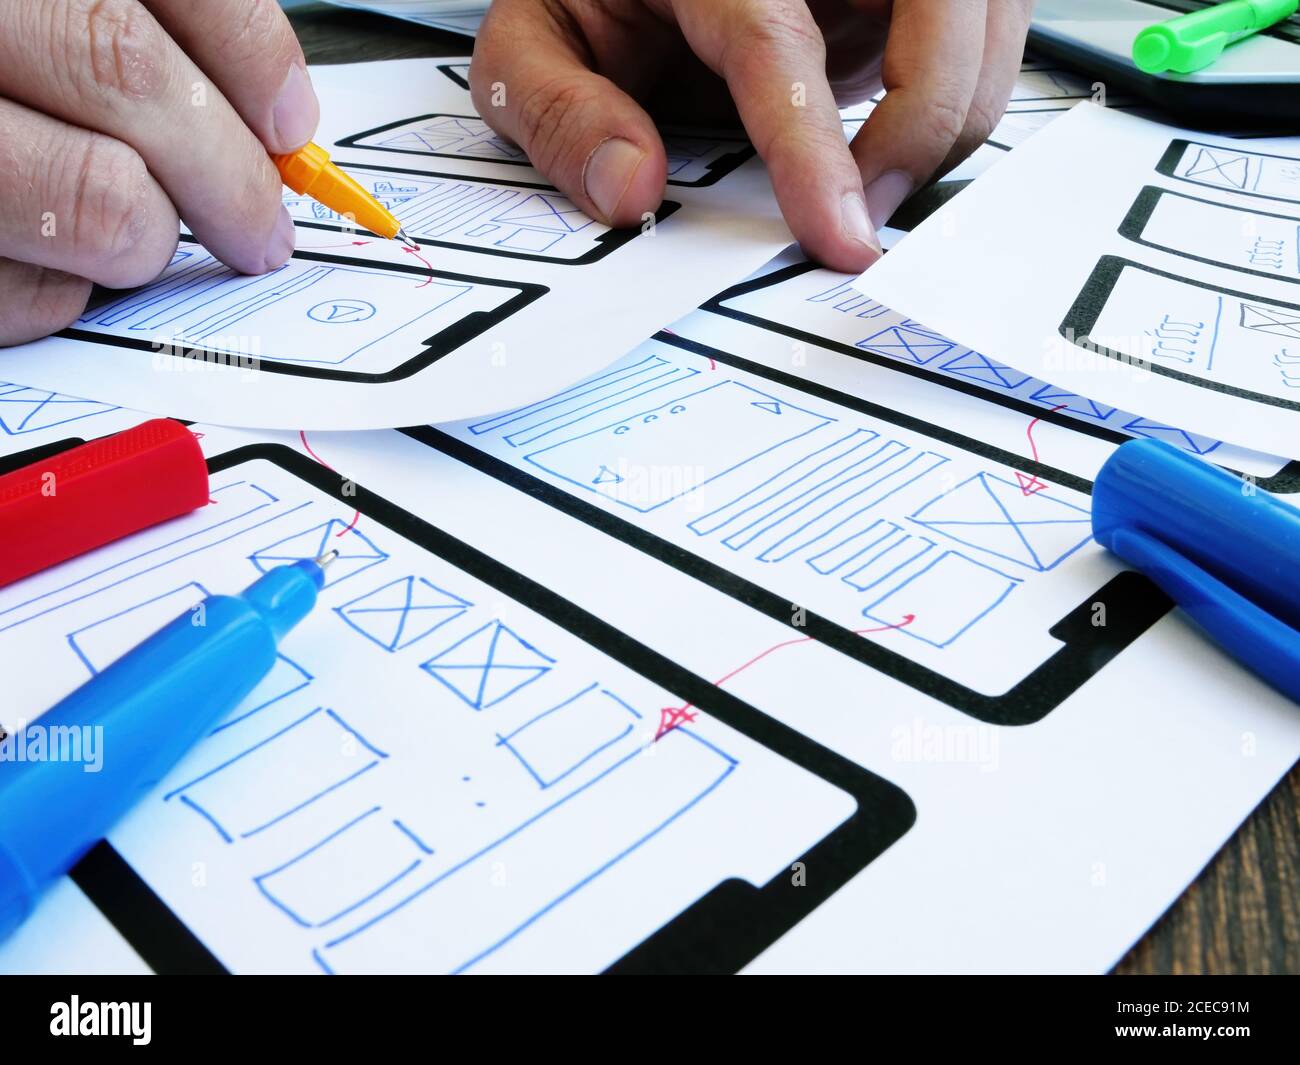 The Ux ui designer develops the design of a mobile application. Stock Photo